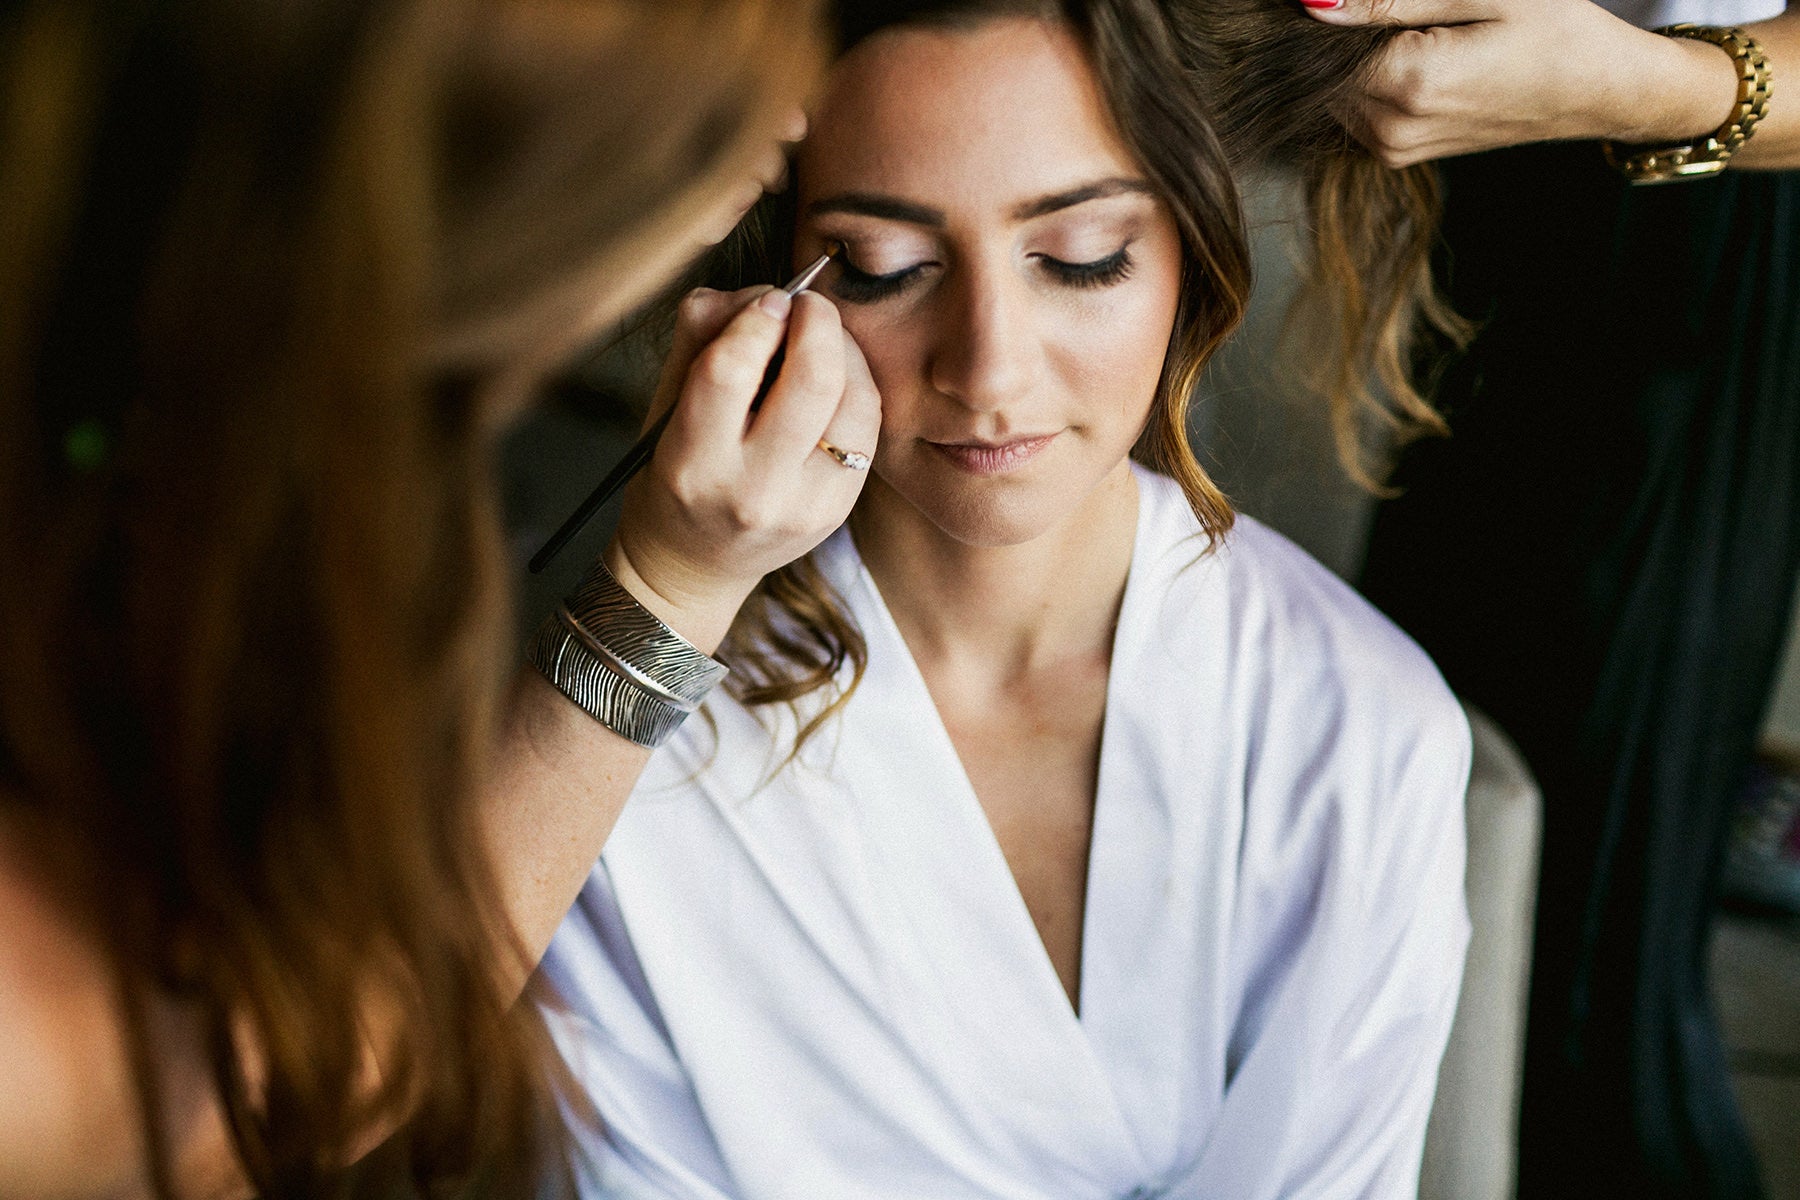 The Complete Guide to Picking the Perfect Makeup for your Engagement Photos